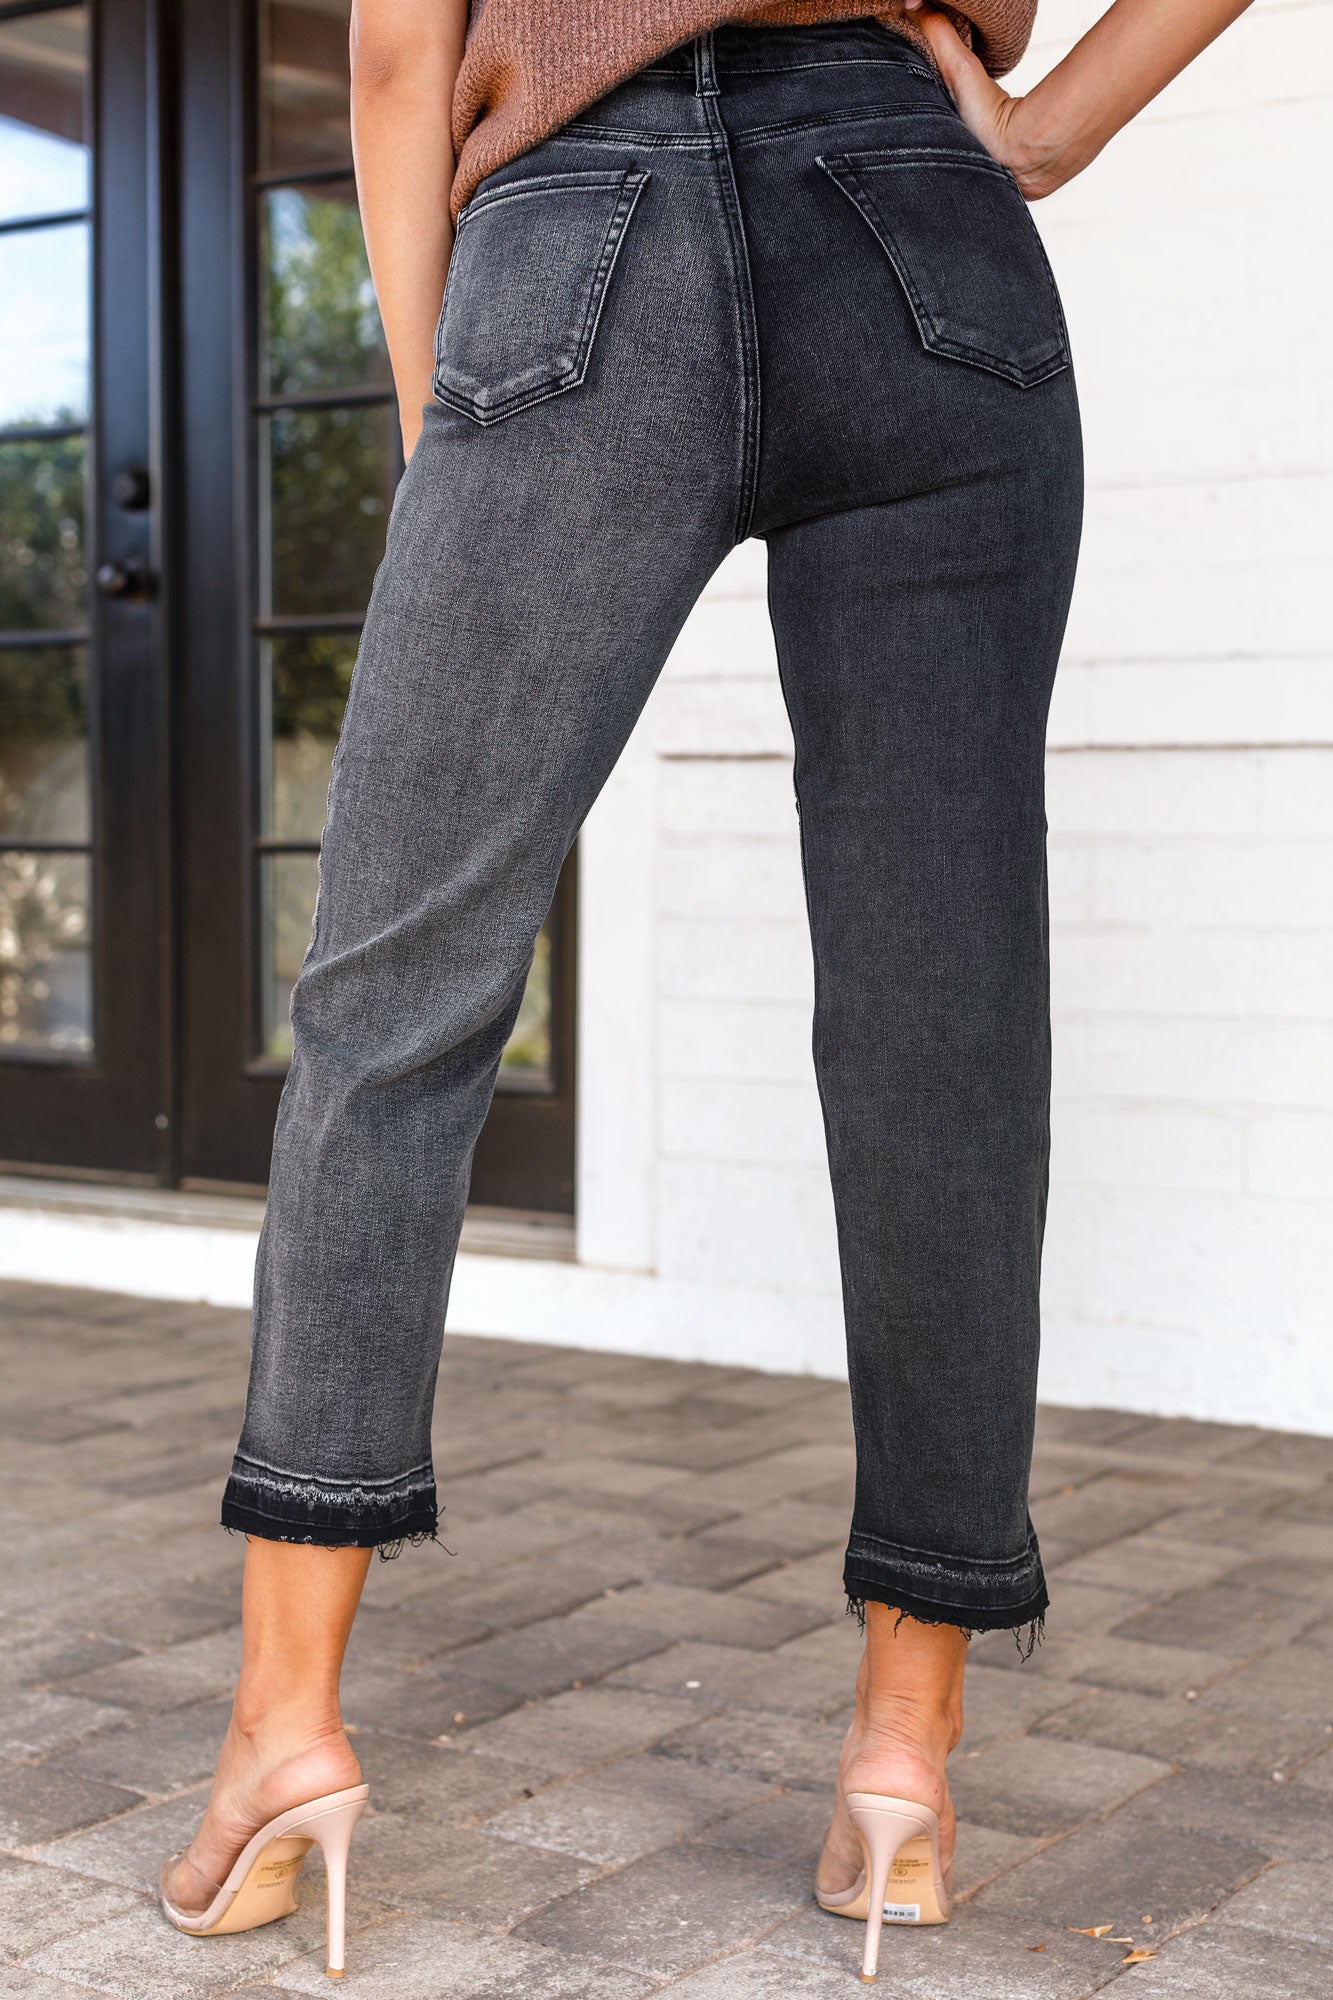 Crossover Black Two Tone Jeans